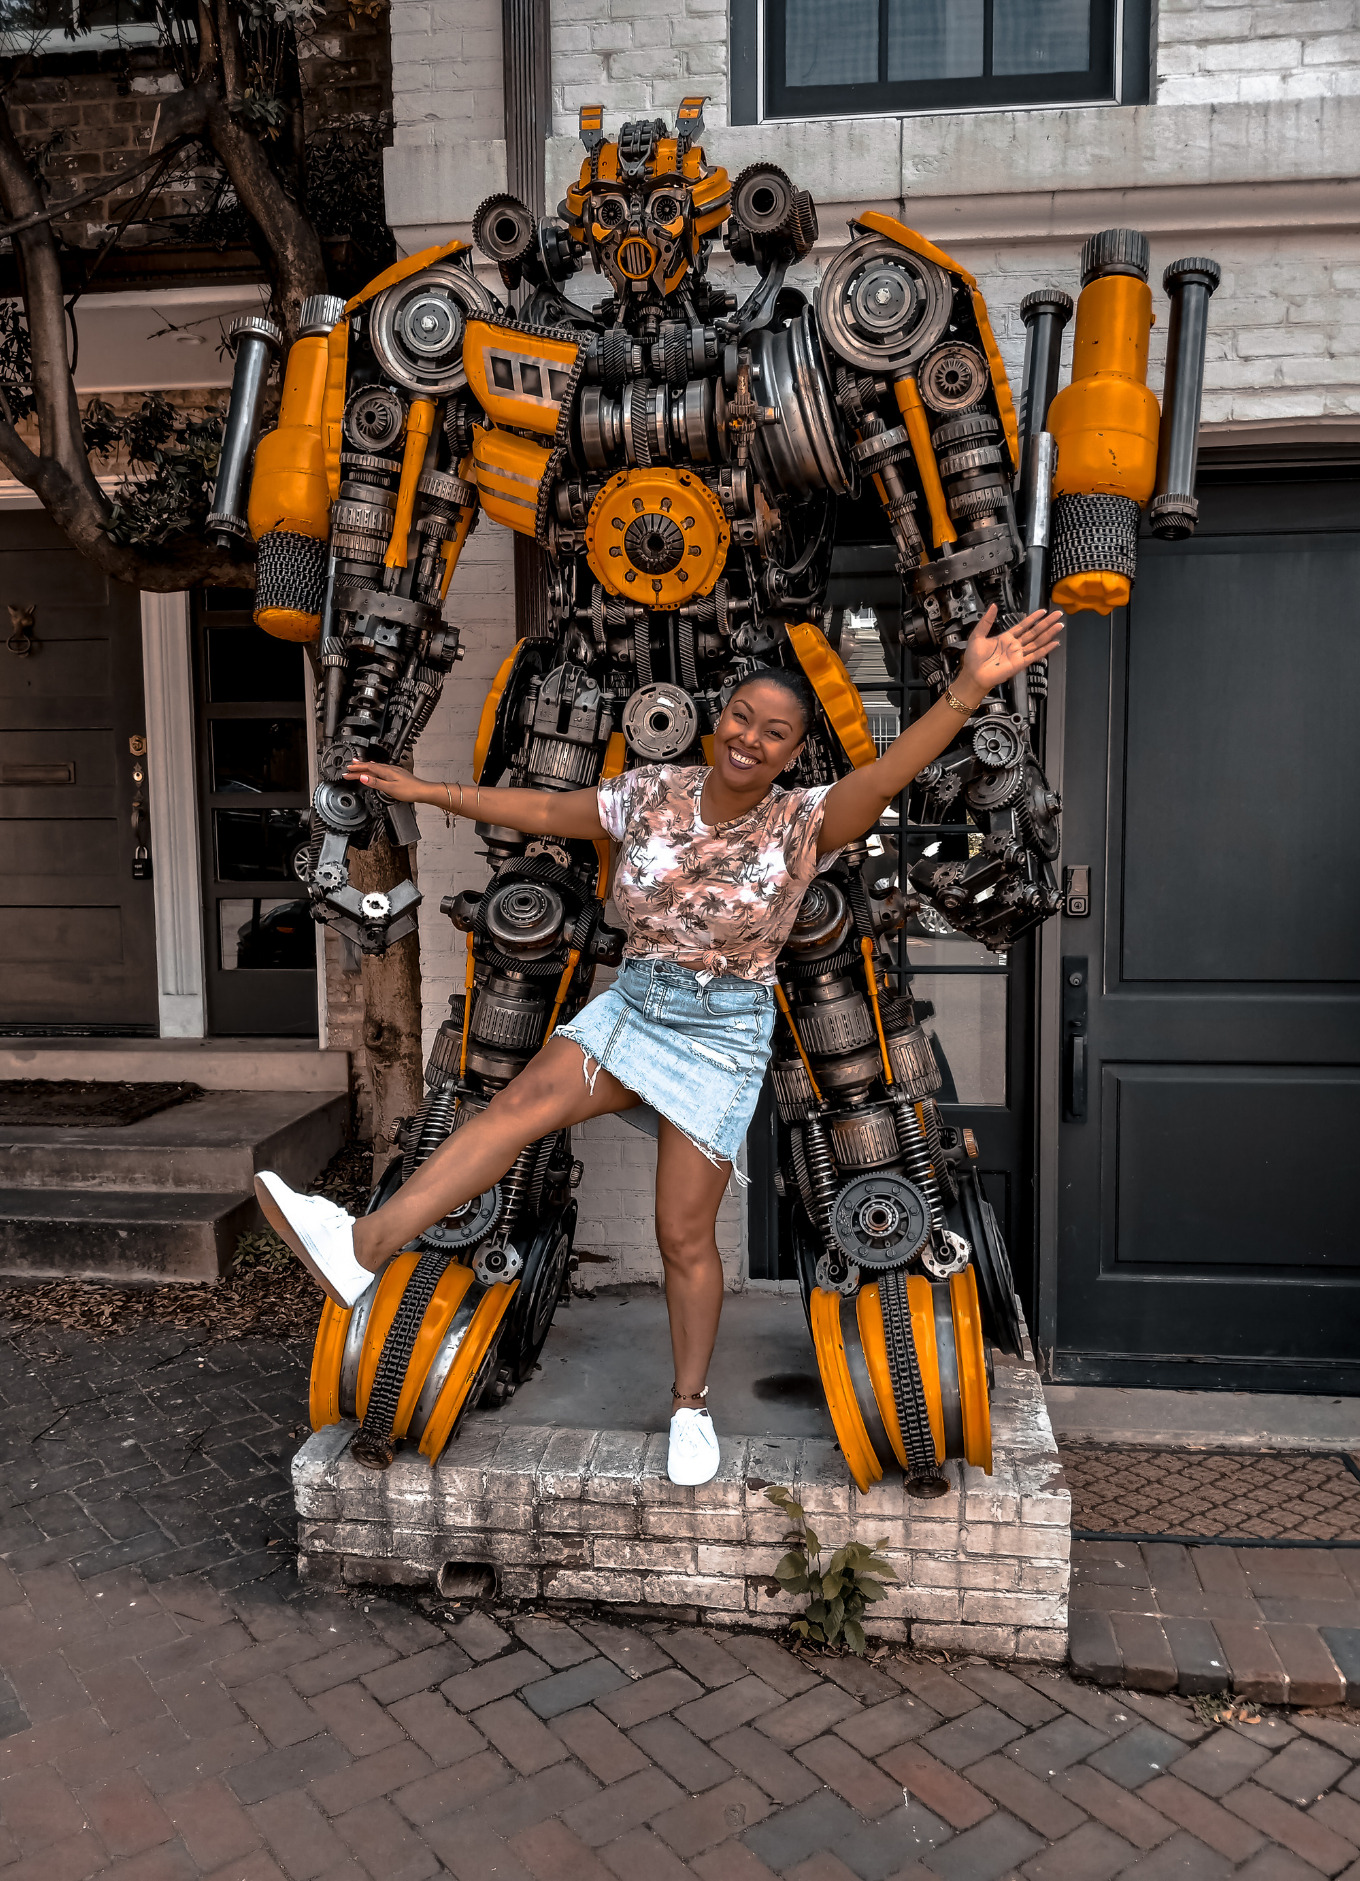 Blogger Rogan Smith poses with Bumblebee in Georgetown, DC